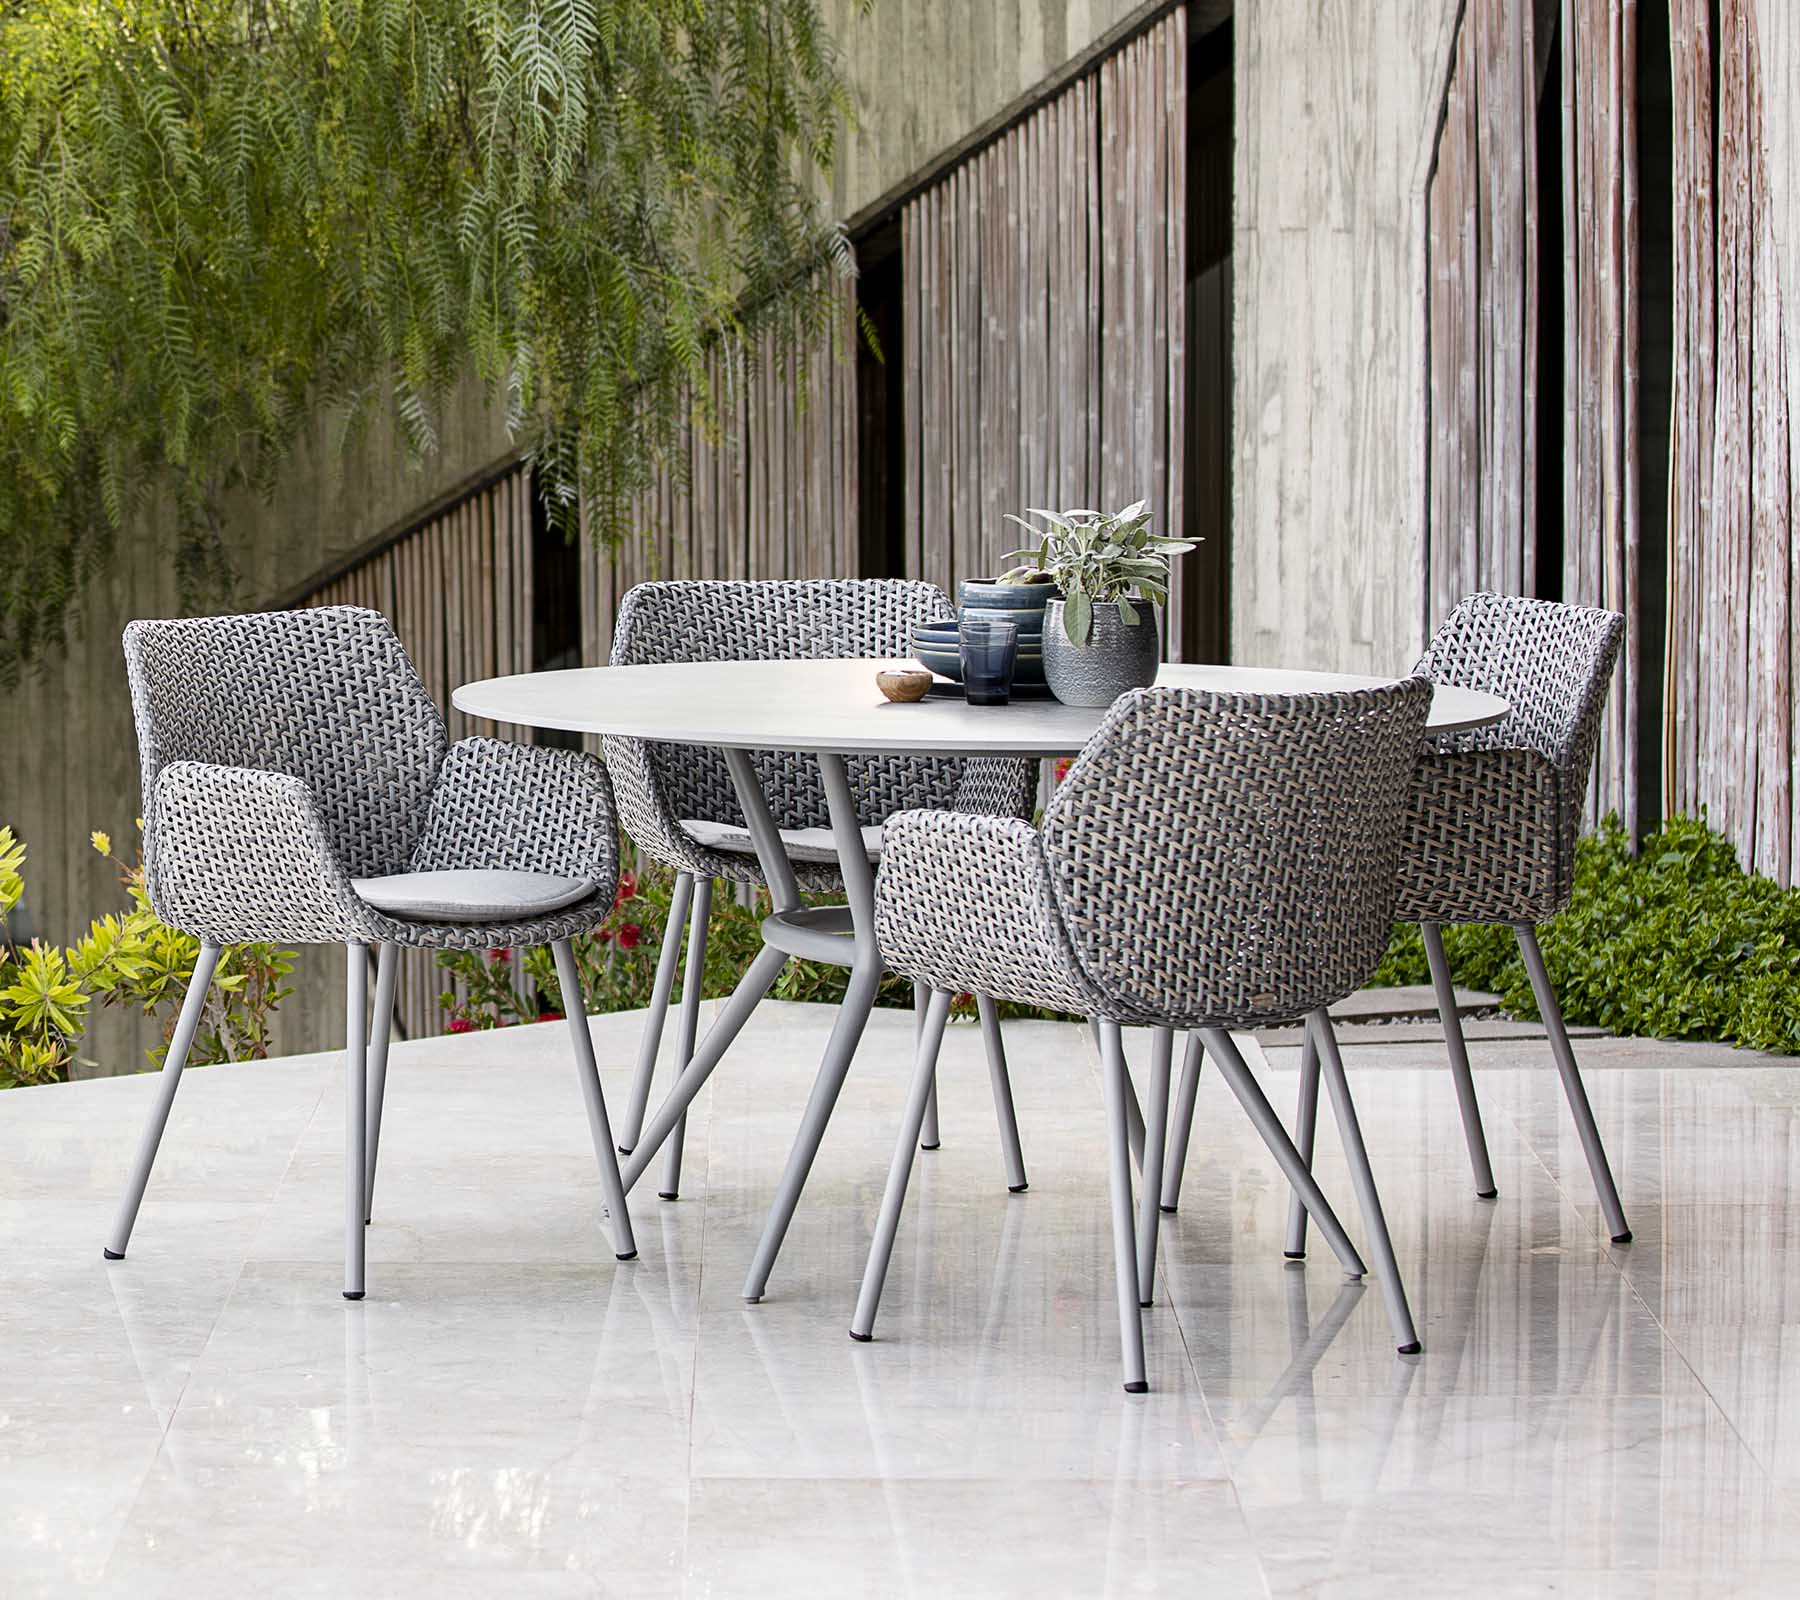 Boxhill's Joy Round Outdoor Dining Table Lifestyle image with 4 dining chairs at patio